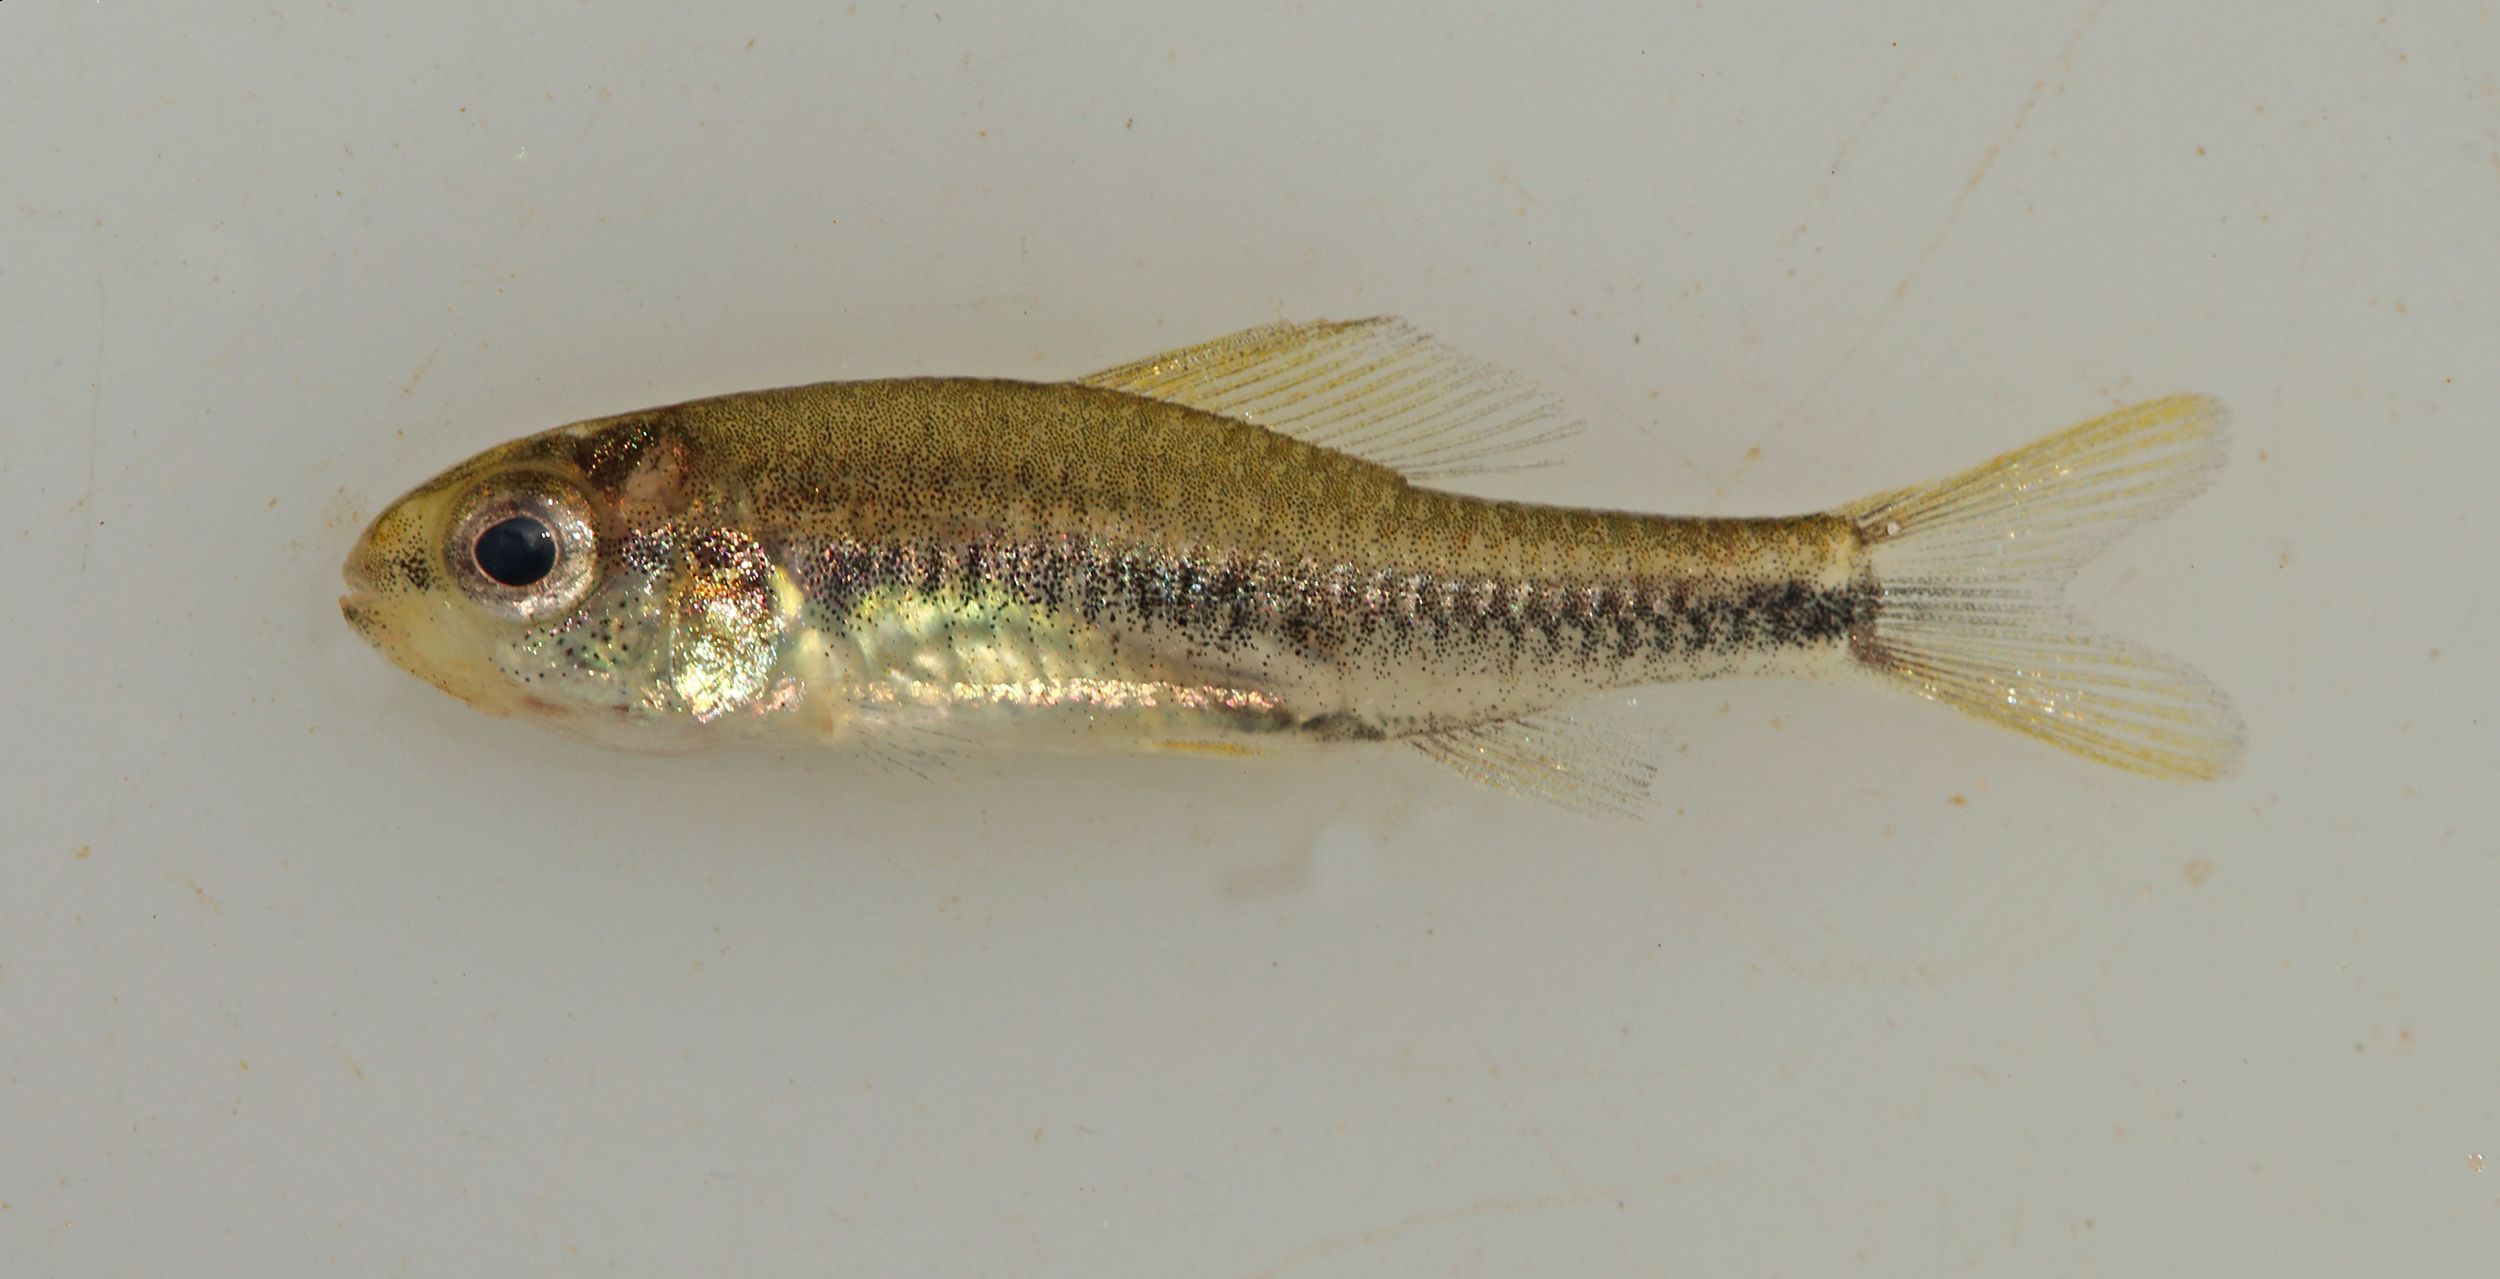 Tiny  fish spotted in a single stream could go extinct just after  being found